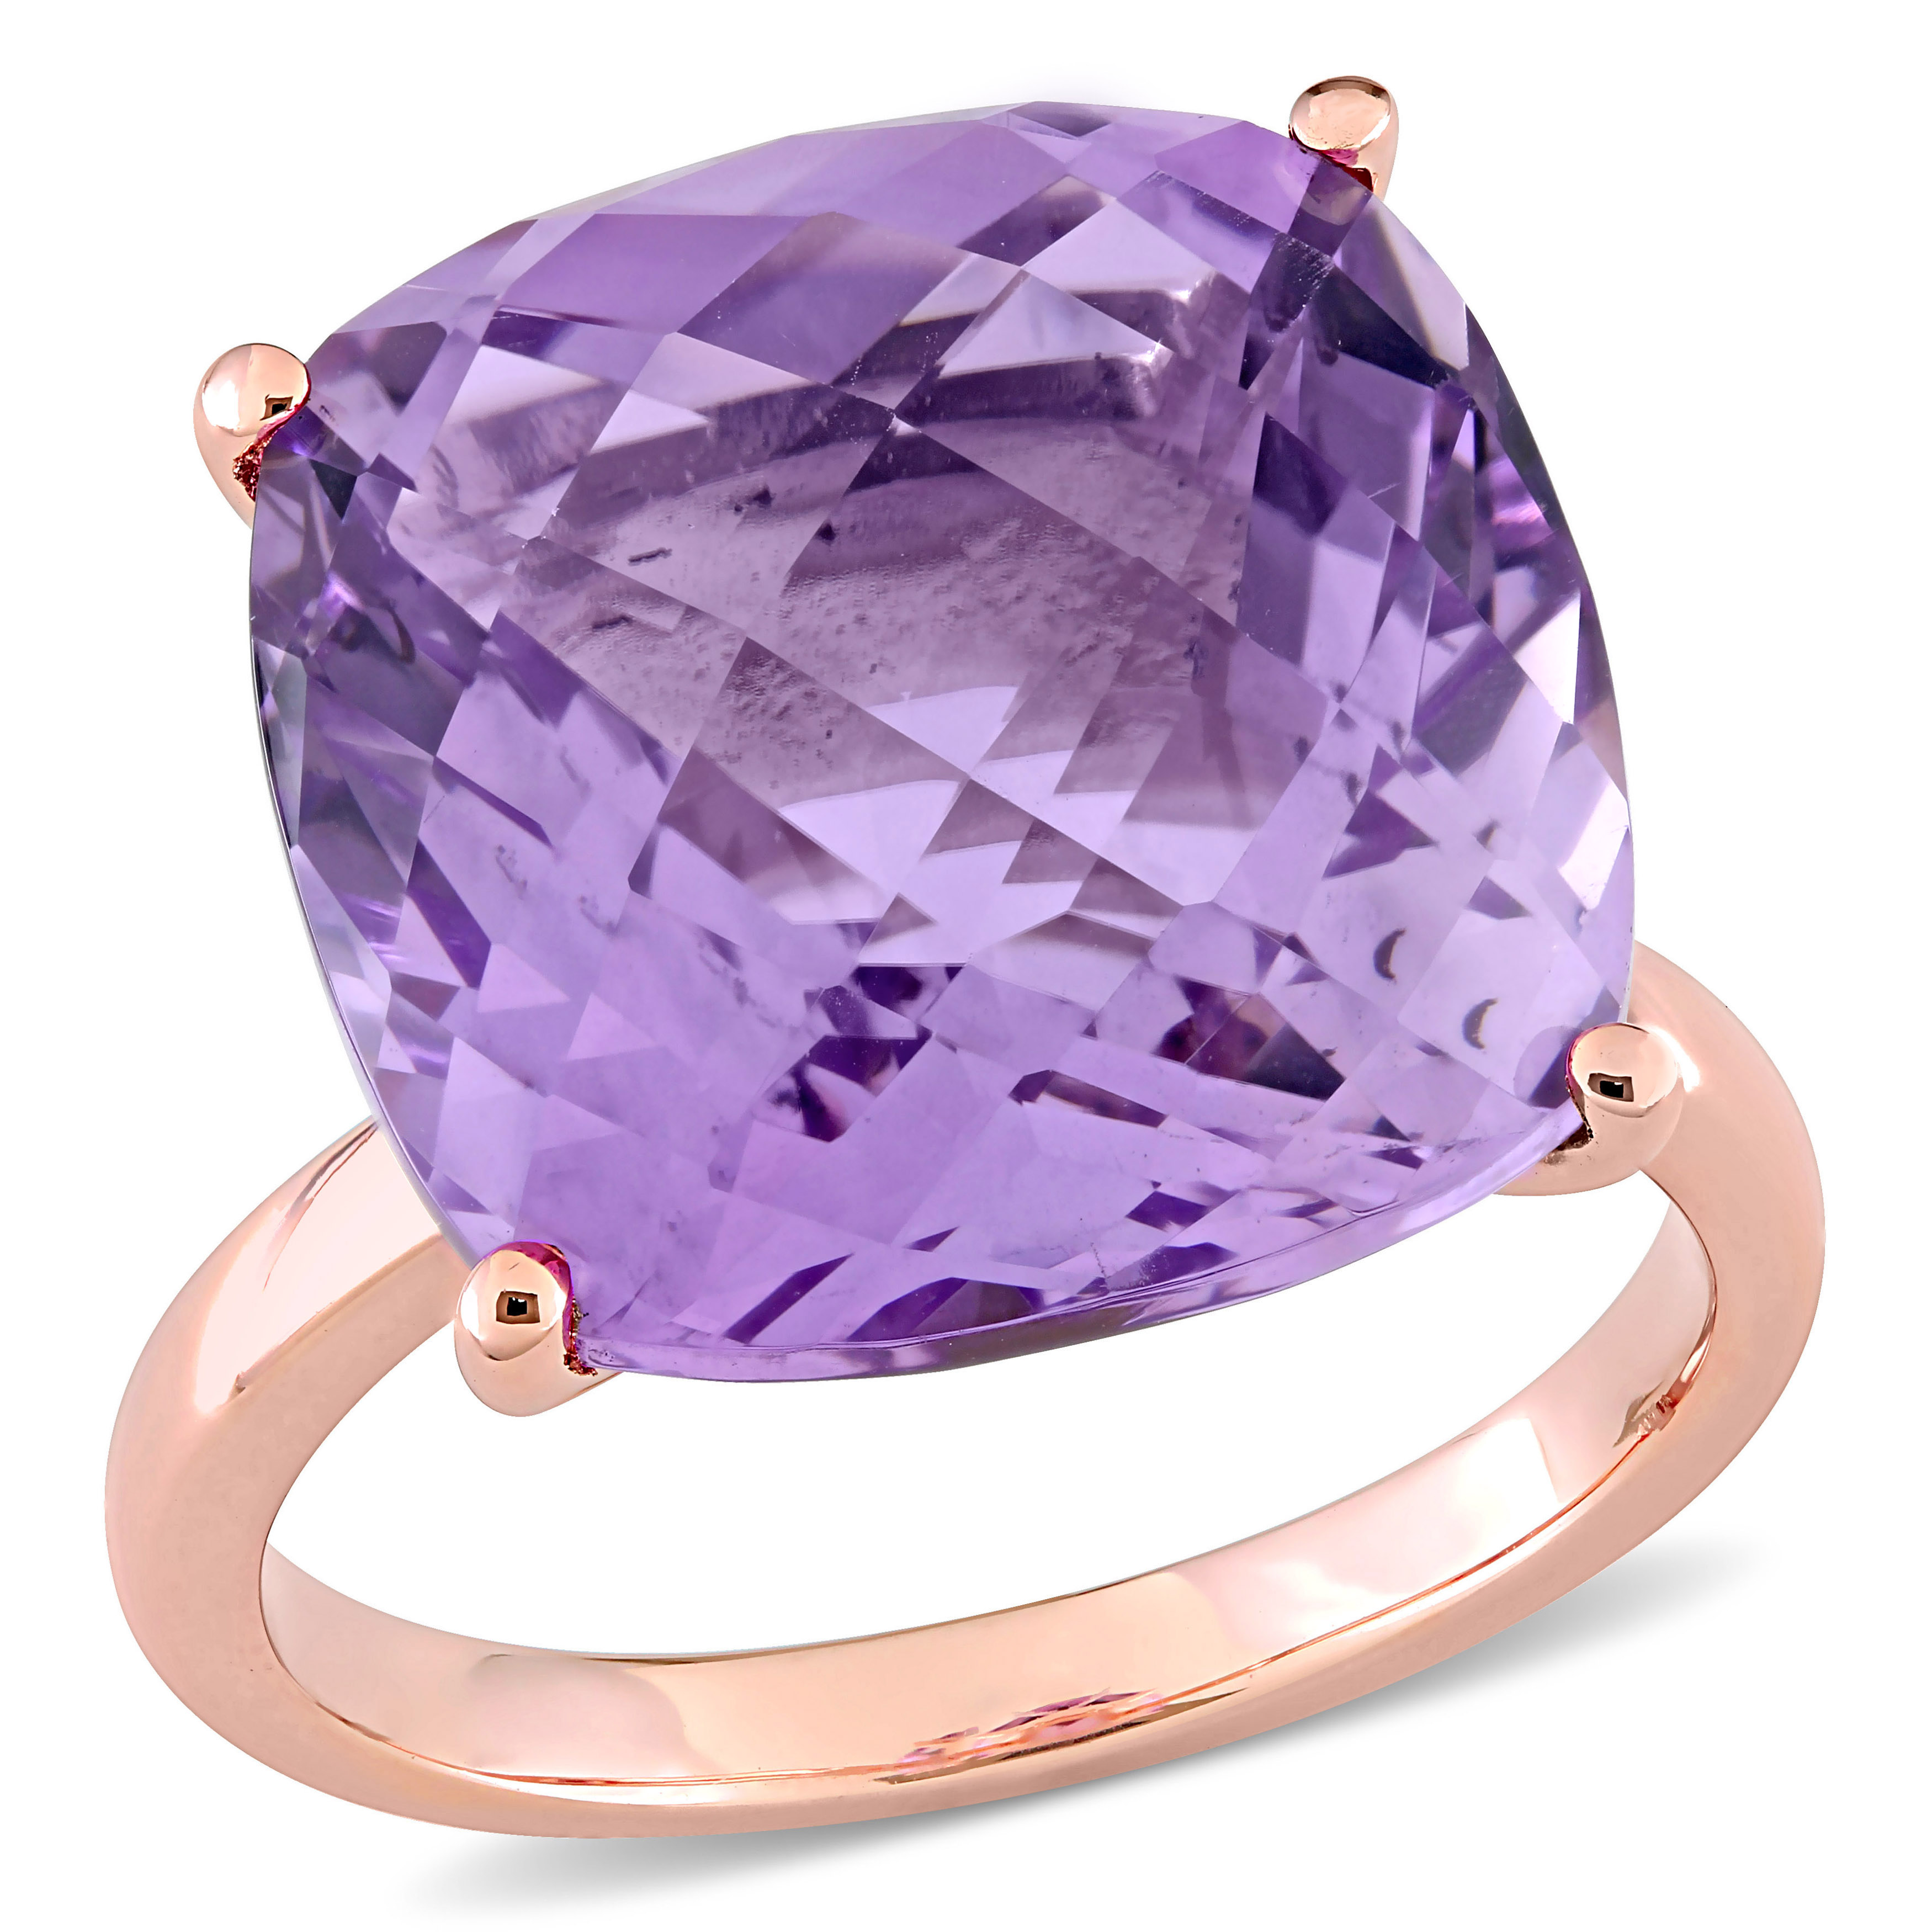 13 1/3 CT TGW Pink Amethyst Cocktail Ring in 14k Rose Gold